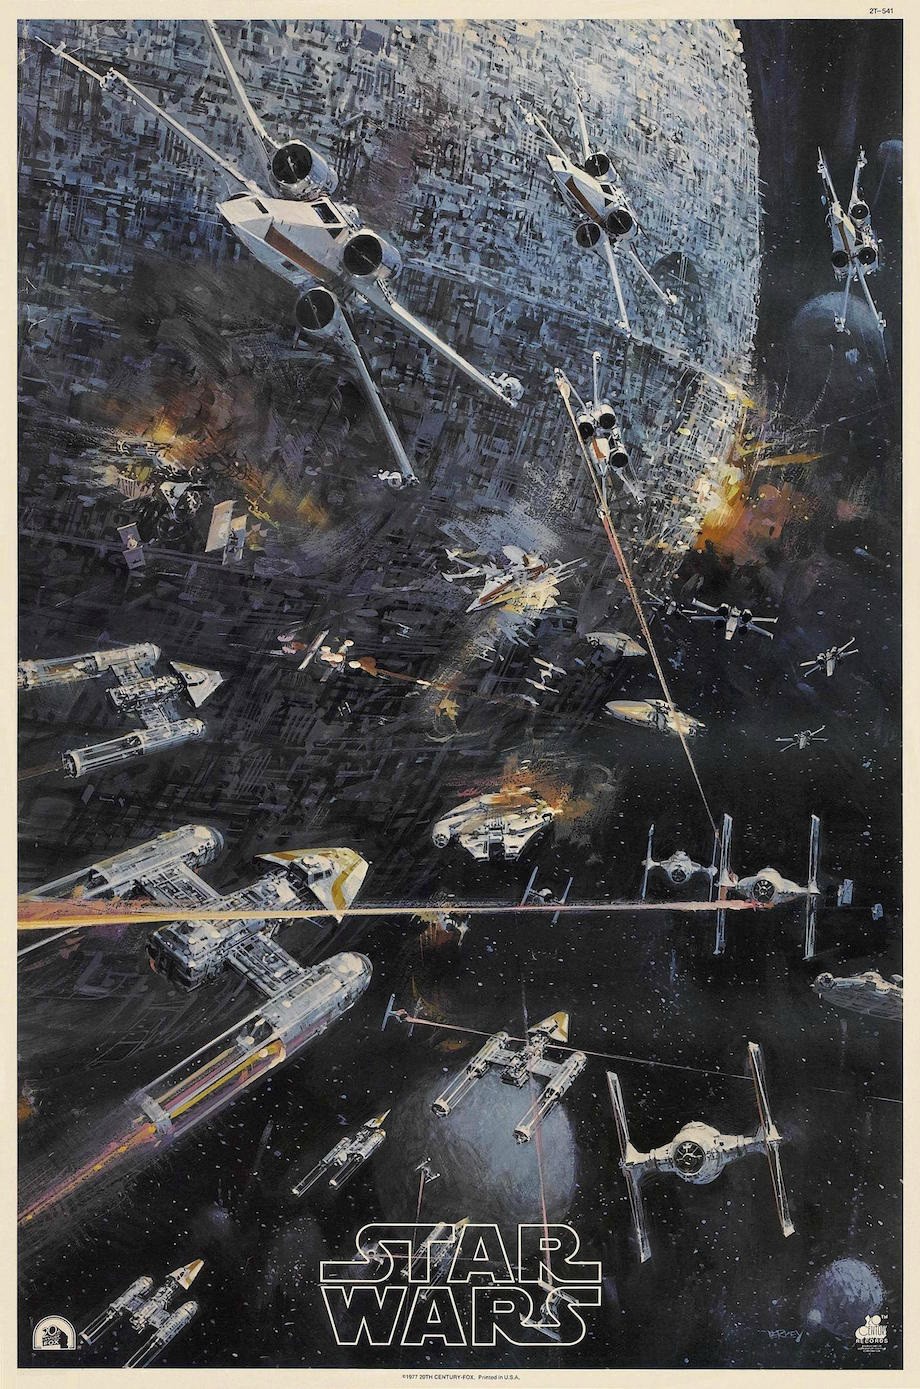 The original Star Wars concept art is absolutely amazing